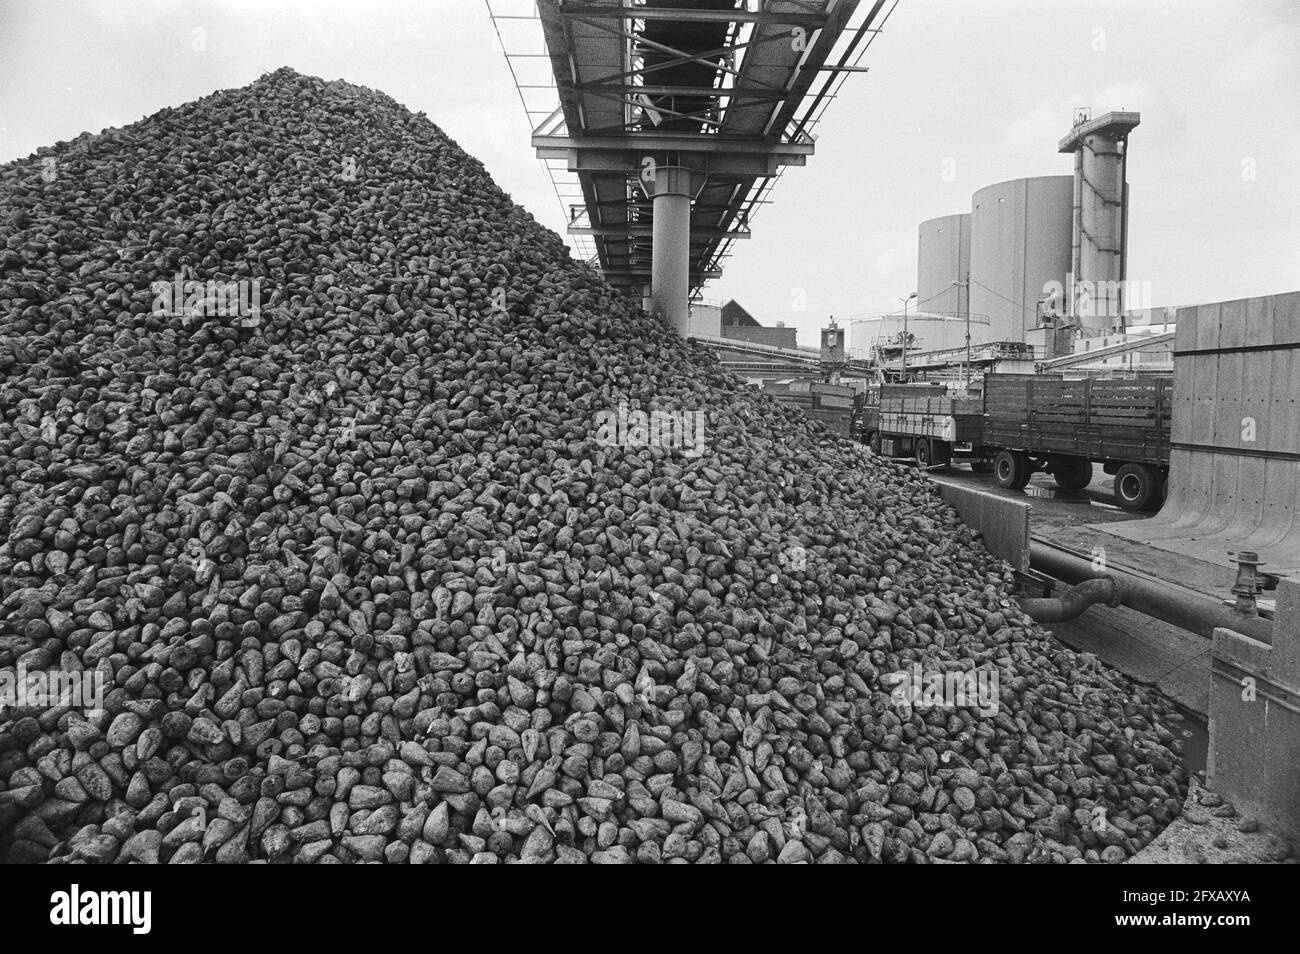 A truck unloads beets, September 25, 1979, Info-trucks, factories, sugar beets, The Netherlands, 20th century press agency photo, news to remember, documentary, historic photography 1945-1990, visual stories, human history of the Twentieth Century, capturing moments in time Stock Photo